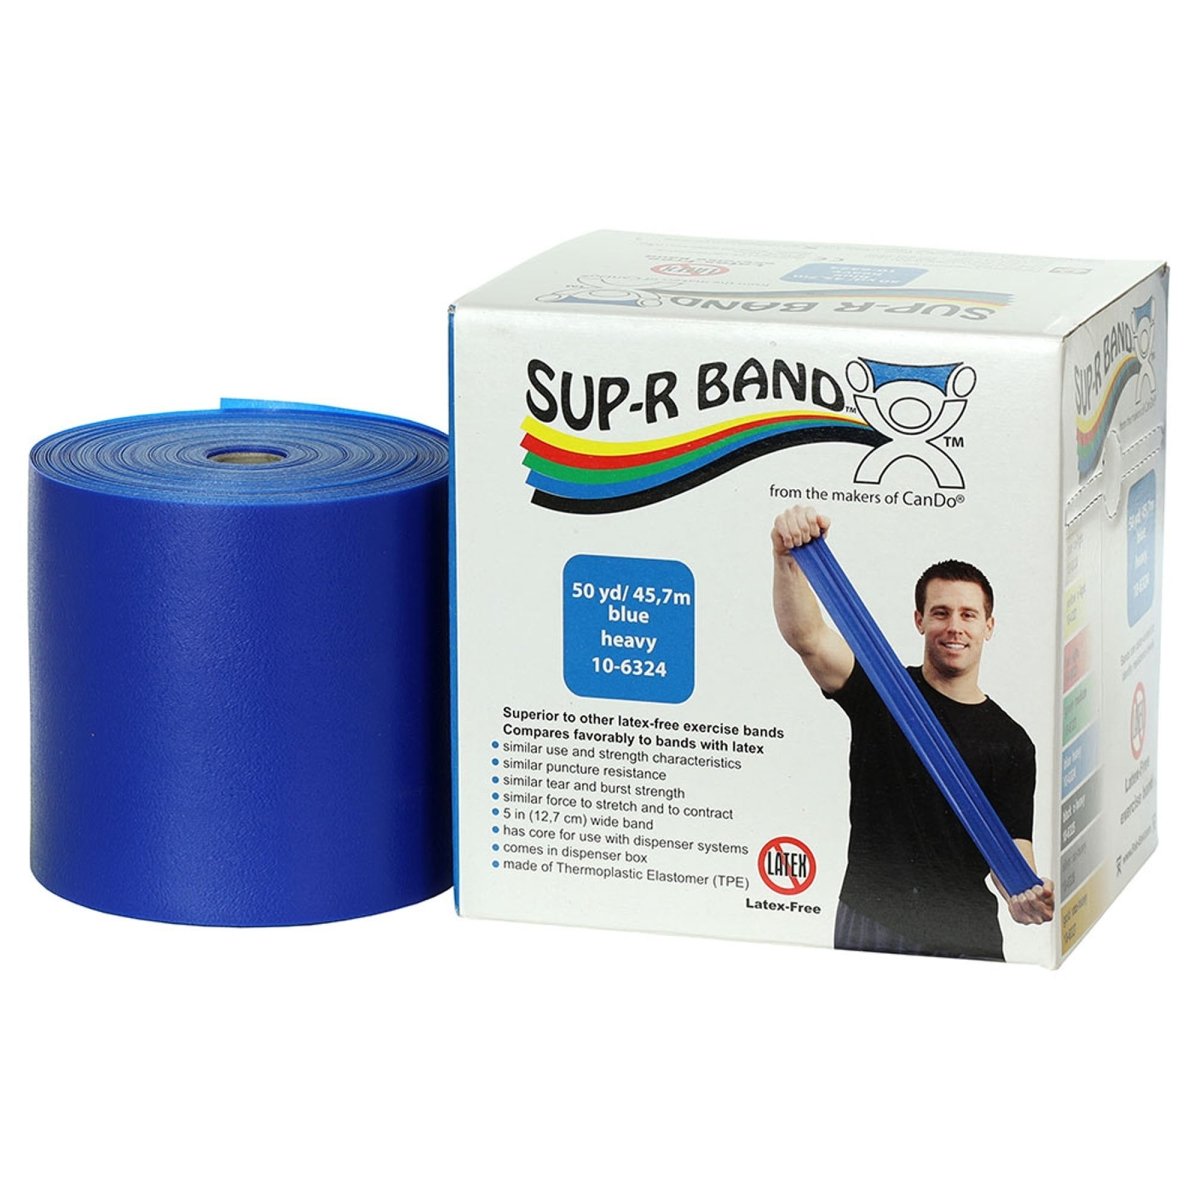 Sup-R Band Exercise Resistance Band, Blue, 5 Inch x 50 Yard - 930467_EA - 1